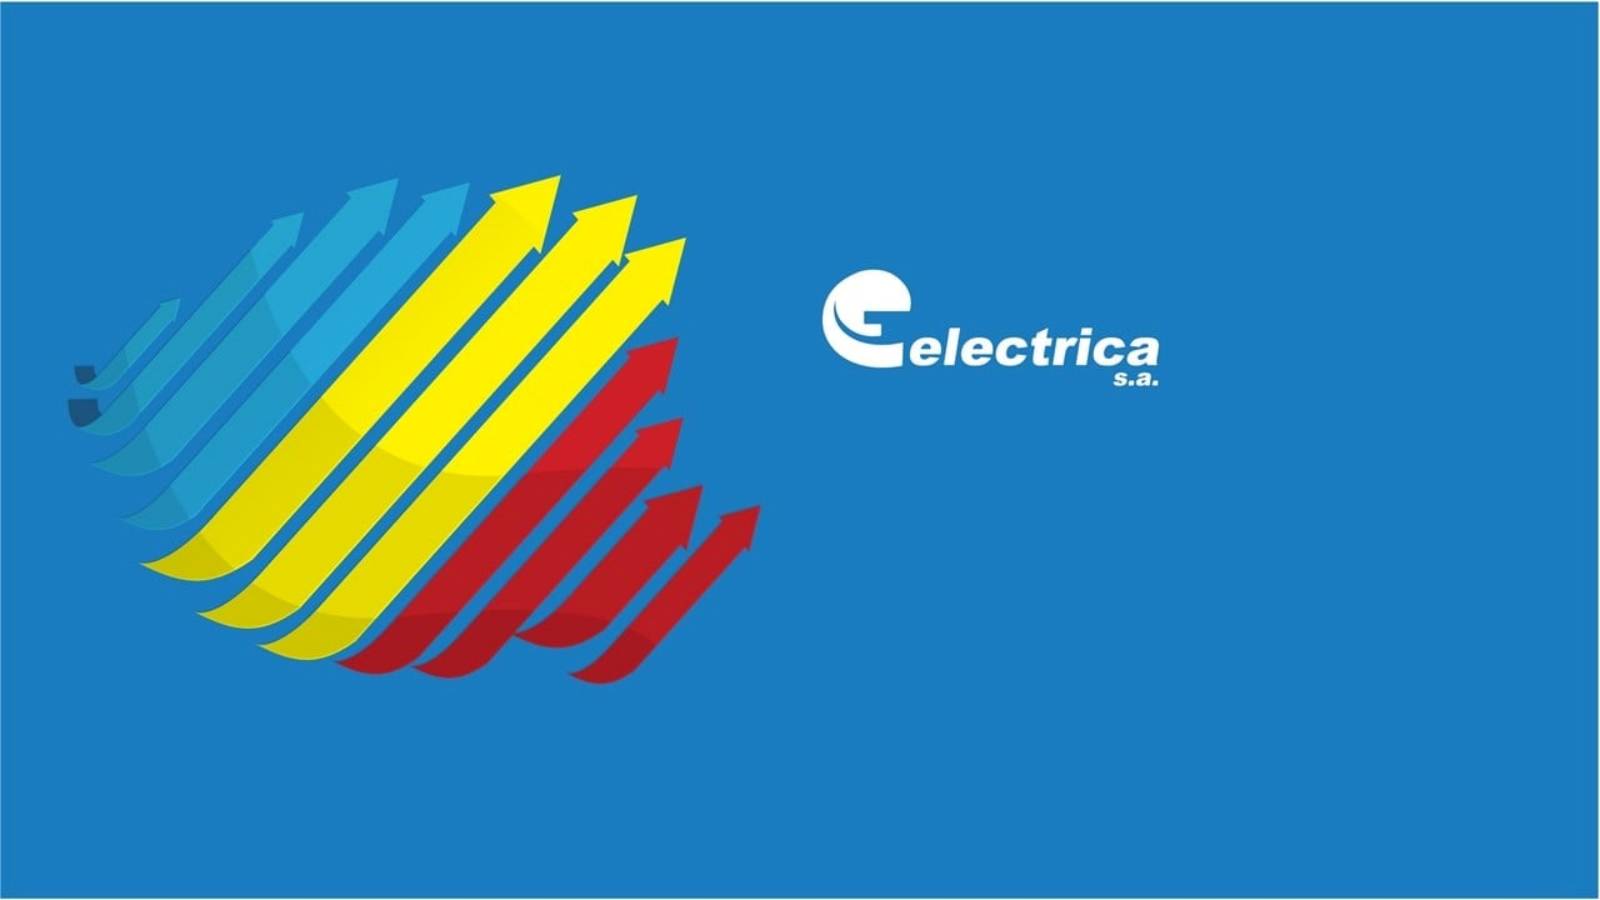 Electrica Official Requirement LAST MINUTE IMPORTANT Information Romanian Customers